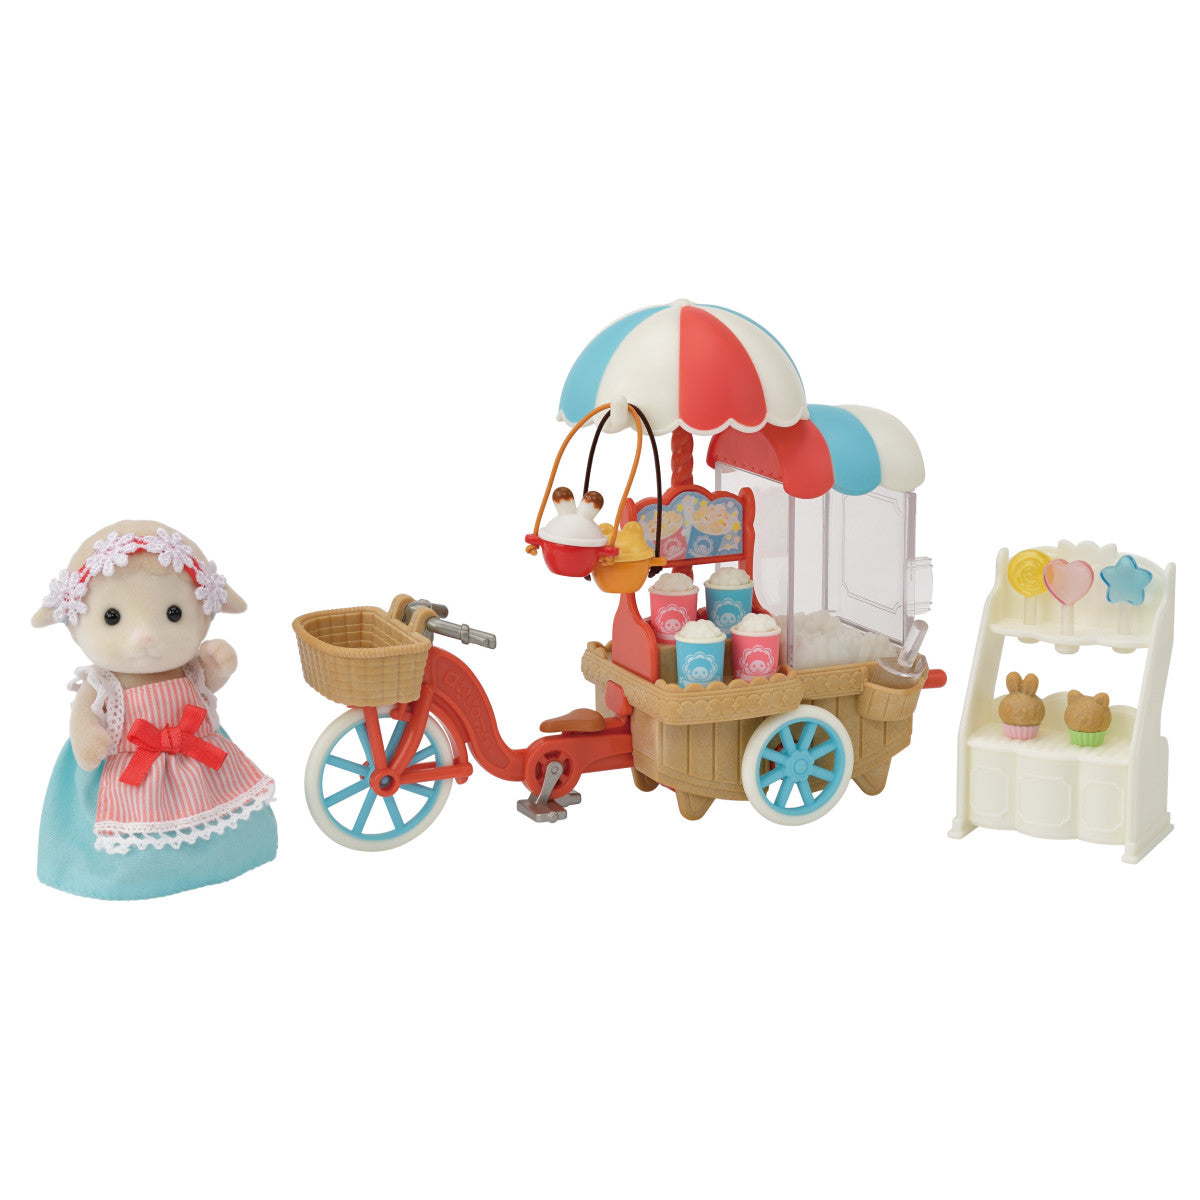 Calico Critters Popcorn Delivery Trike – silly bunny salem